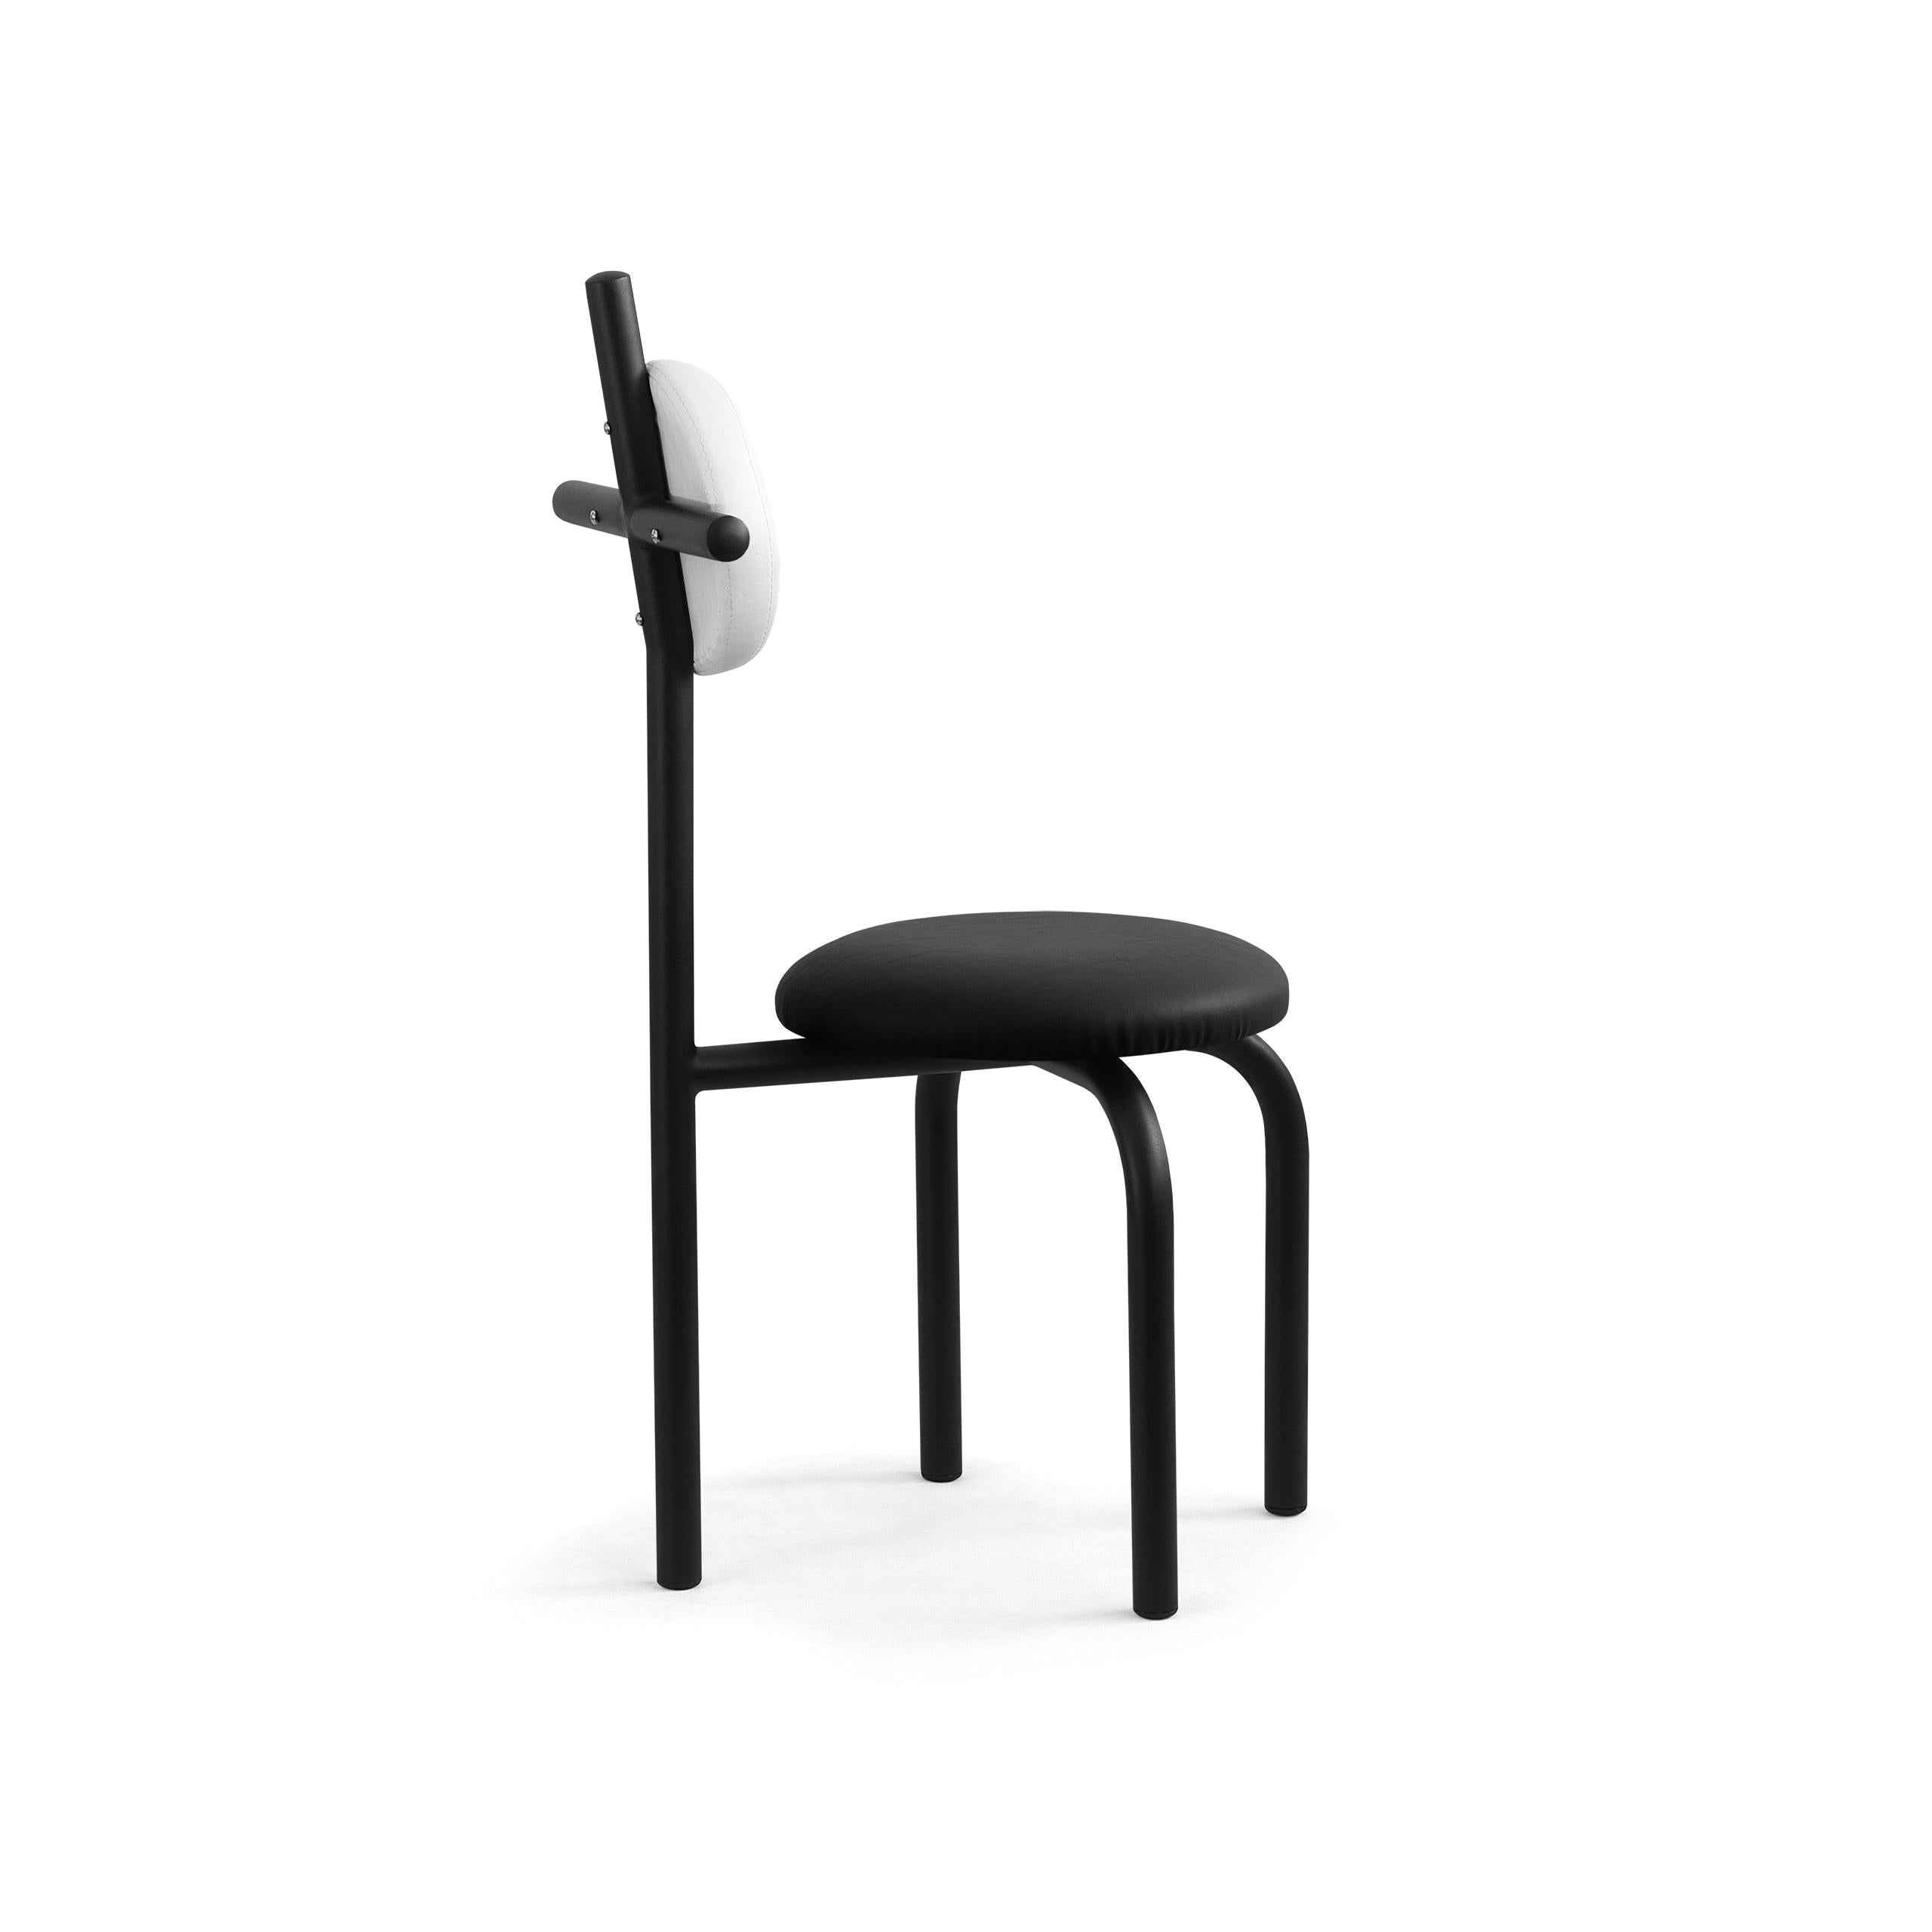 Appliqué PK16 Impermeable Chair, Black Seat & Carbon Steel Structure by Paulo Kobylka For Sale